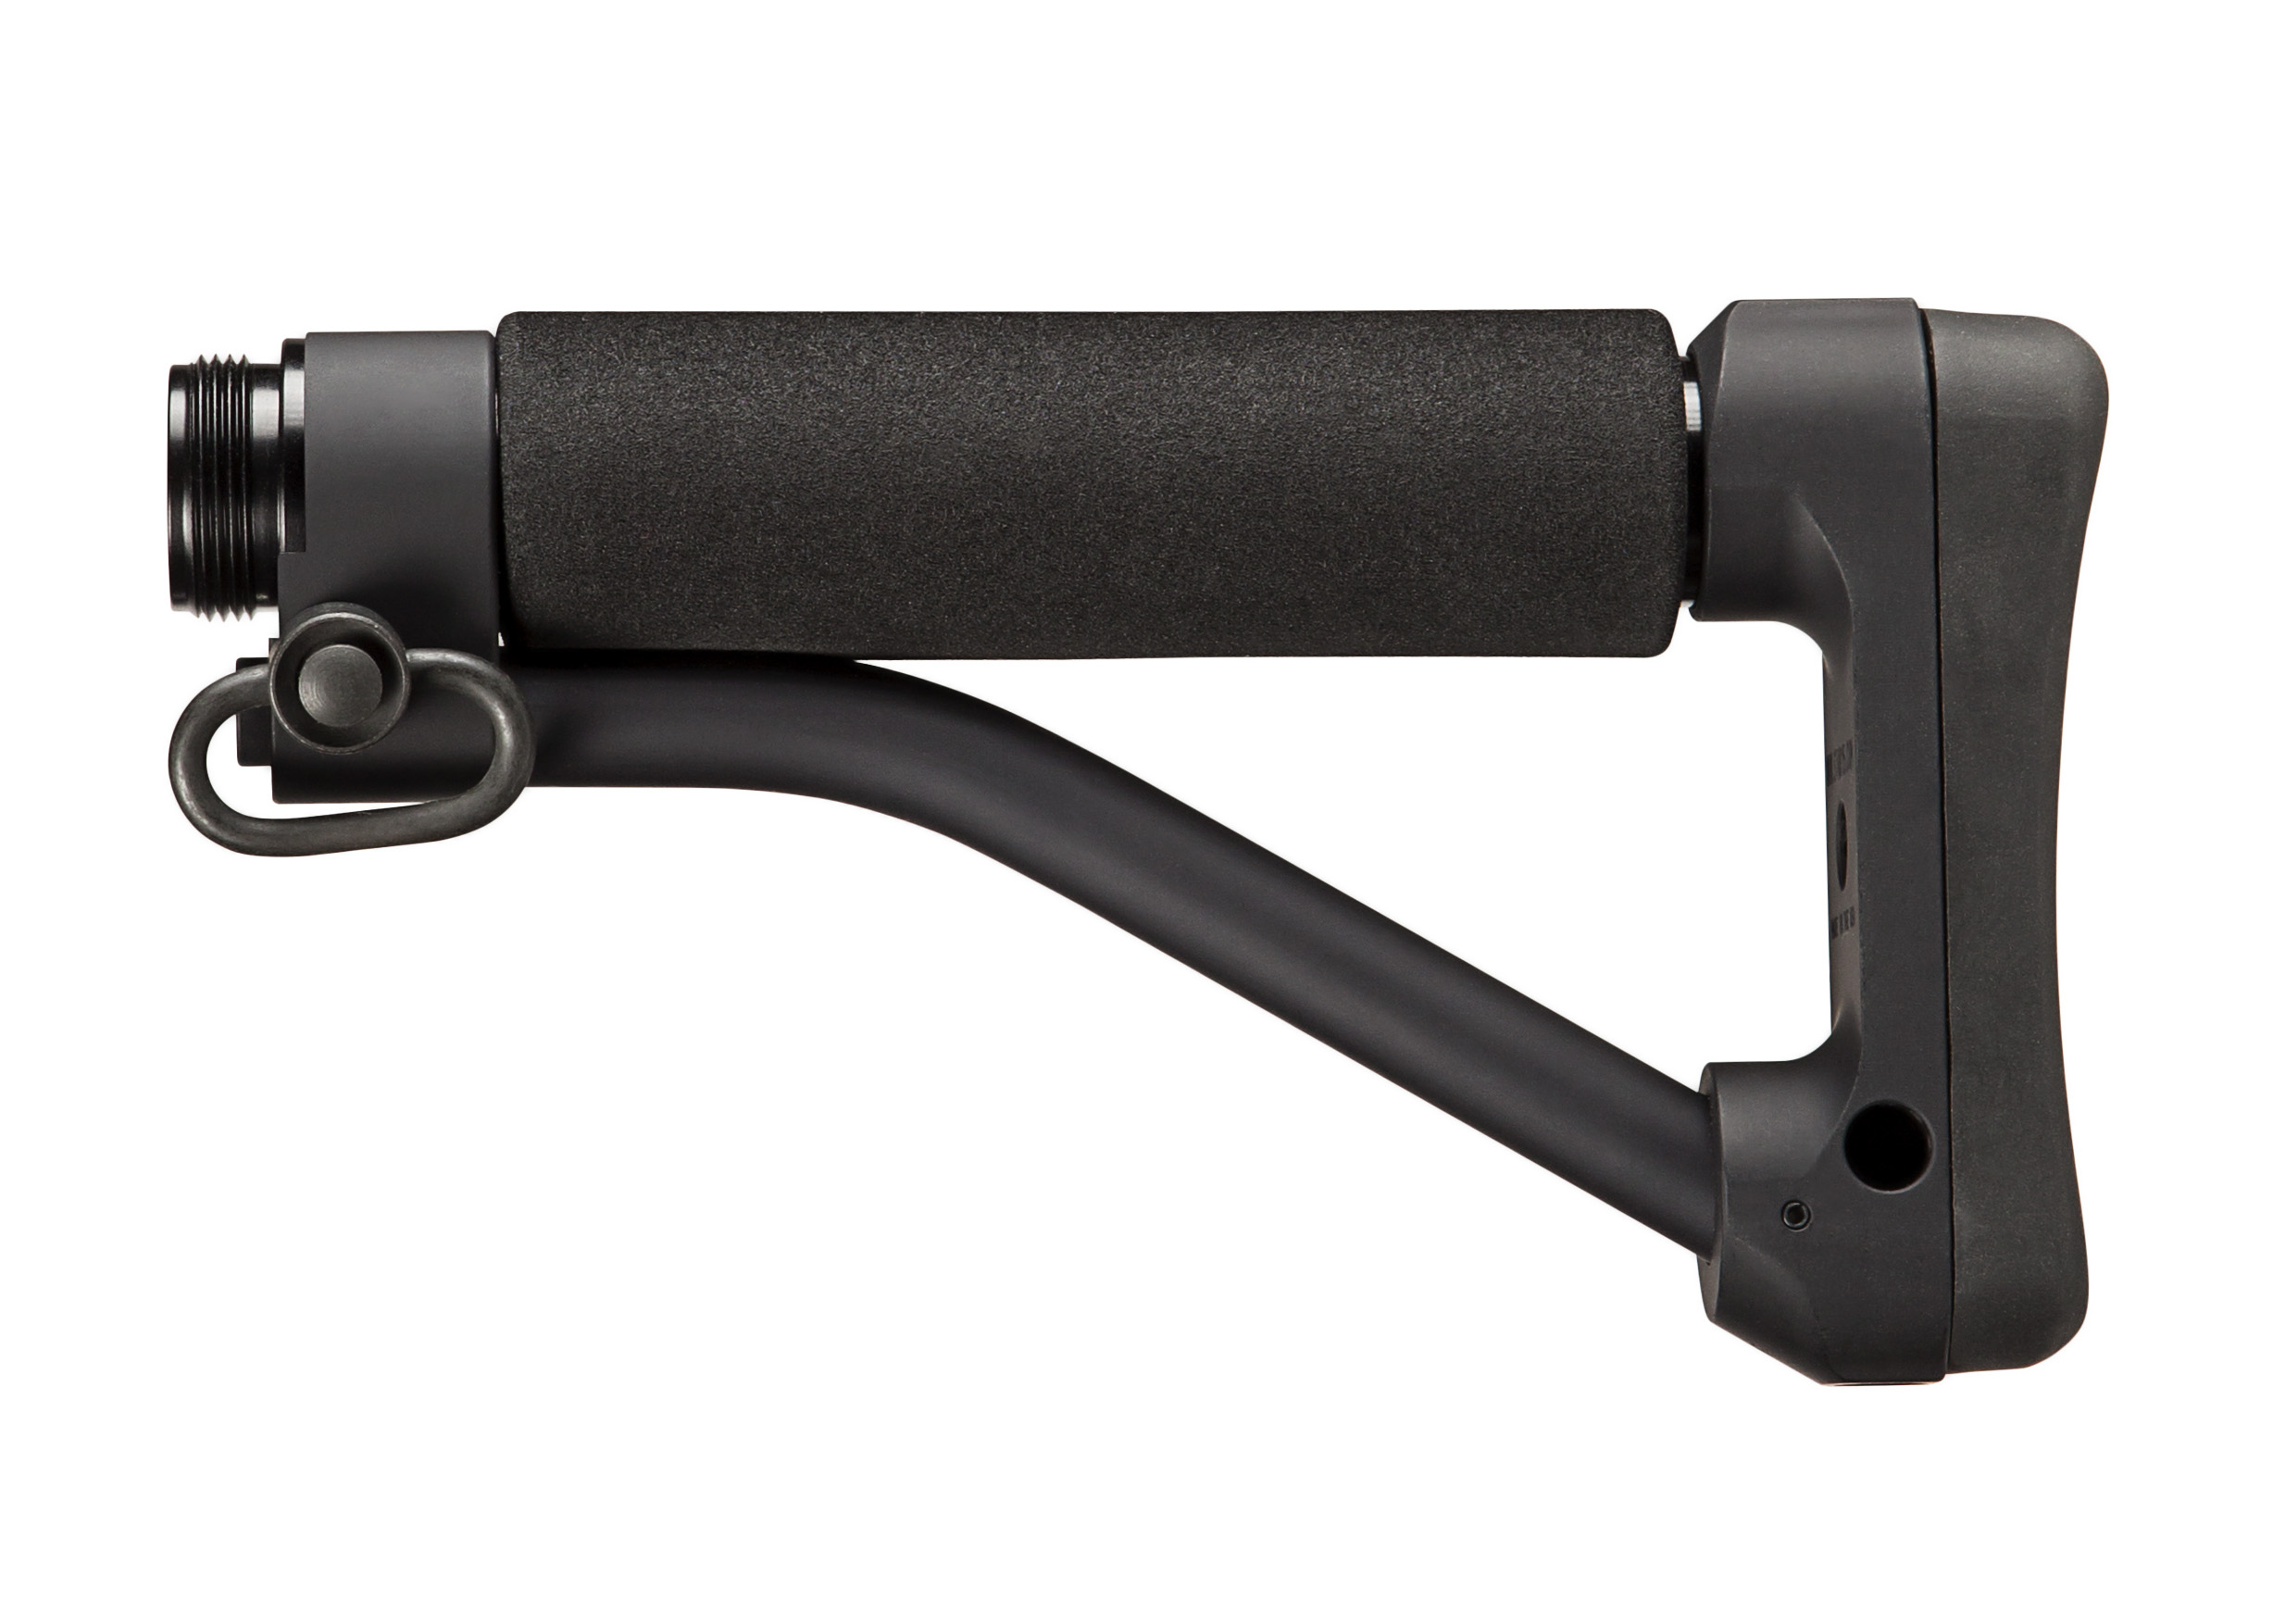 ARFX Stock: An anodized aluminum stock that is lighter than a standard stoc...